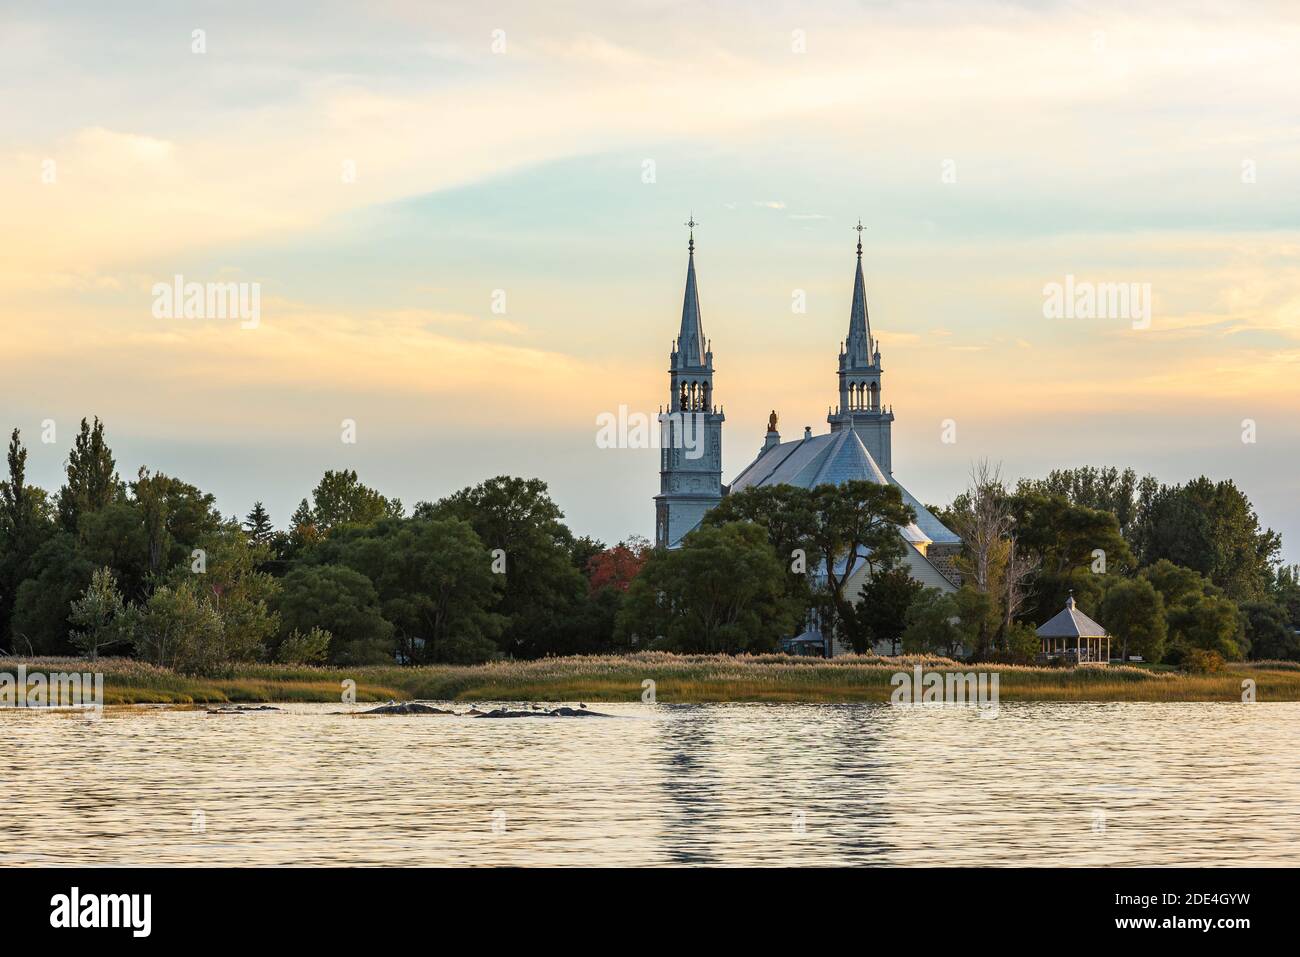 The church of Saint-Roch-des-Aulnaies, Quebec, Canada, at the sunset with the St. Lawrence river in the foreground. Stock Photo